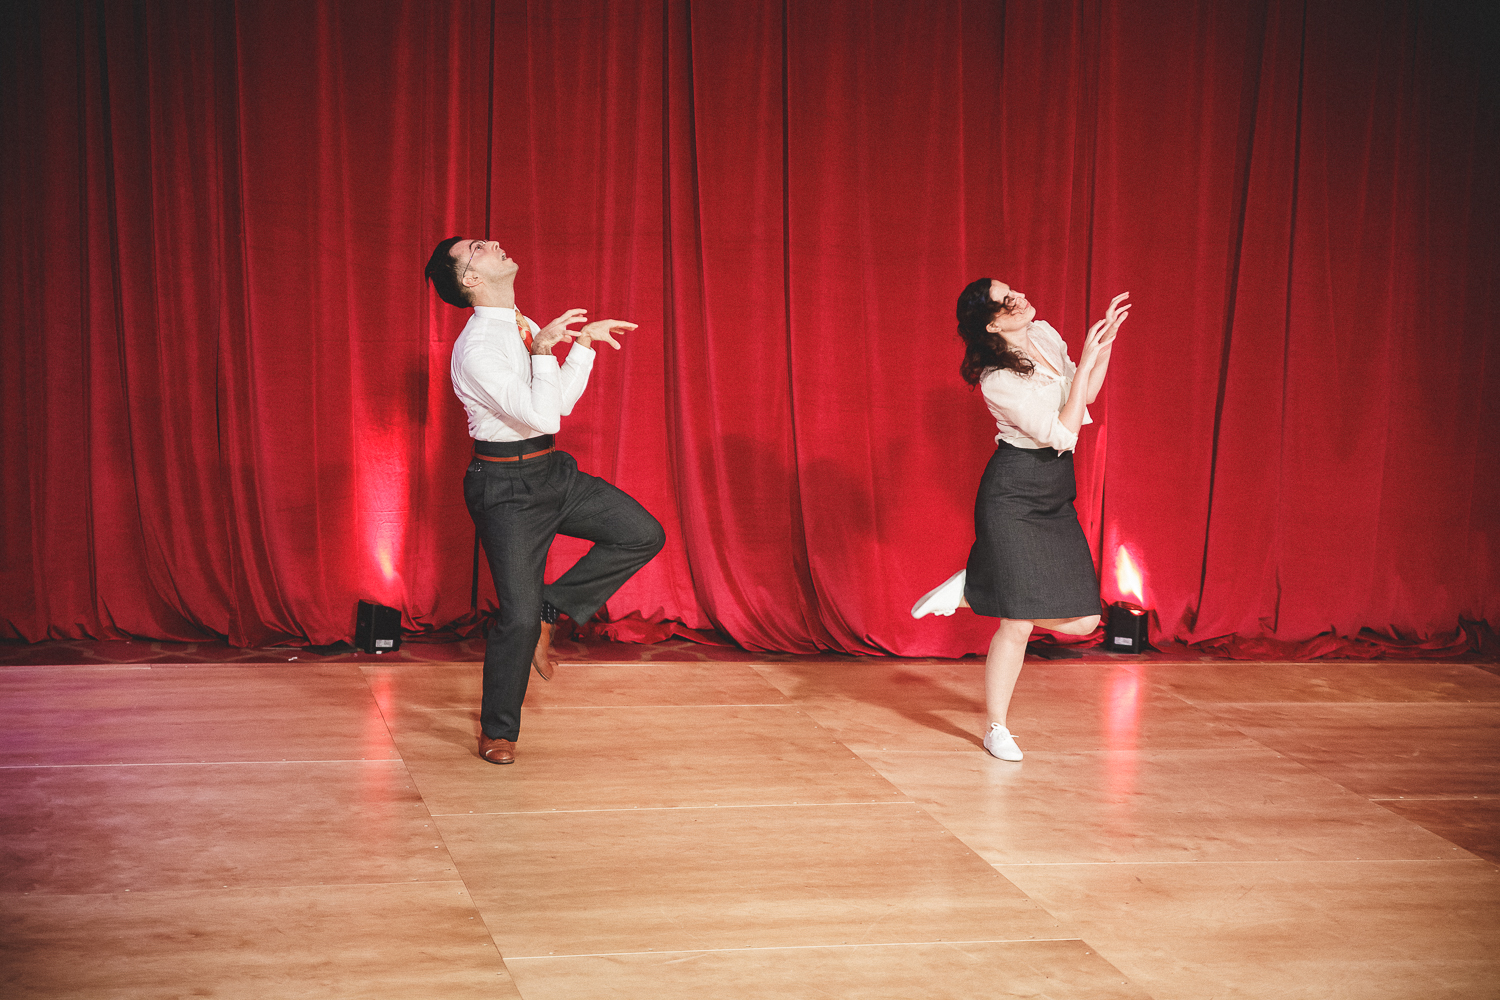  European Swing Dance Championships 2015 - For Dancers Only (http://d.pr/1fEEY) - http://www.ebobrie.com/european-swing-dance-championships-2015 